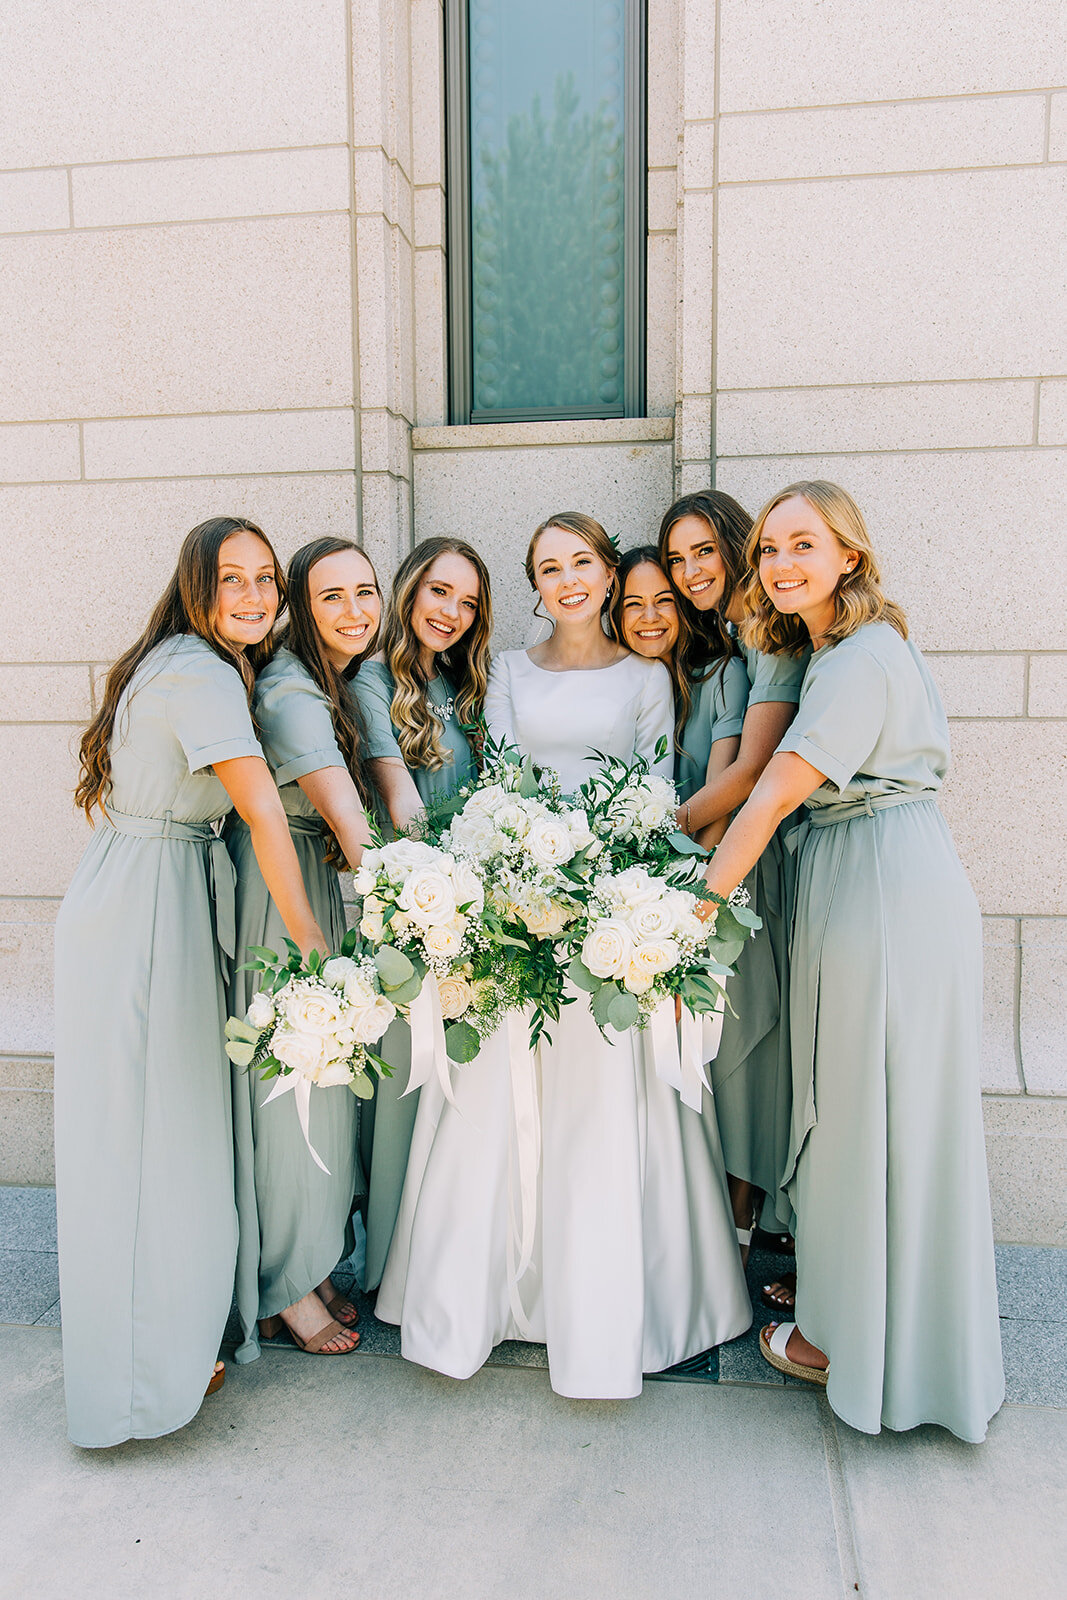  bride posing with her bridesmaids holding bouquets out in a circle white and green florals wedding bouquet inspiration for summer wedding white and grey and sea green wedding color scheme professional wedding photography on a budget from affordable 